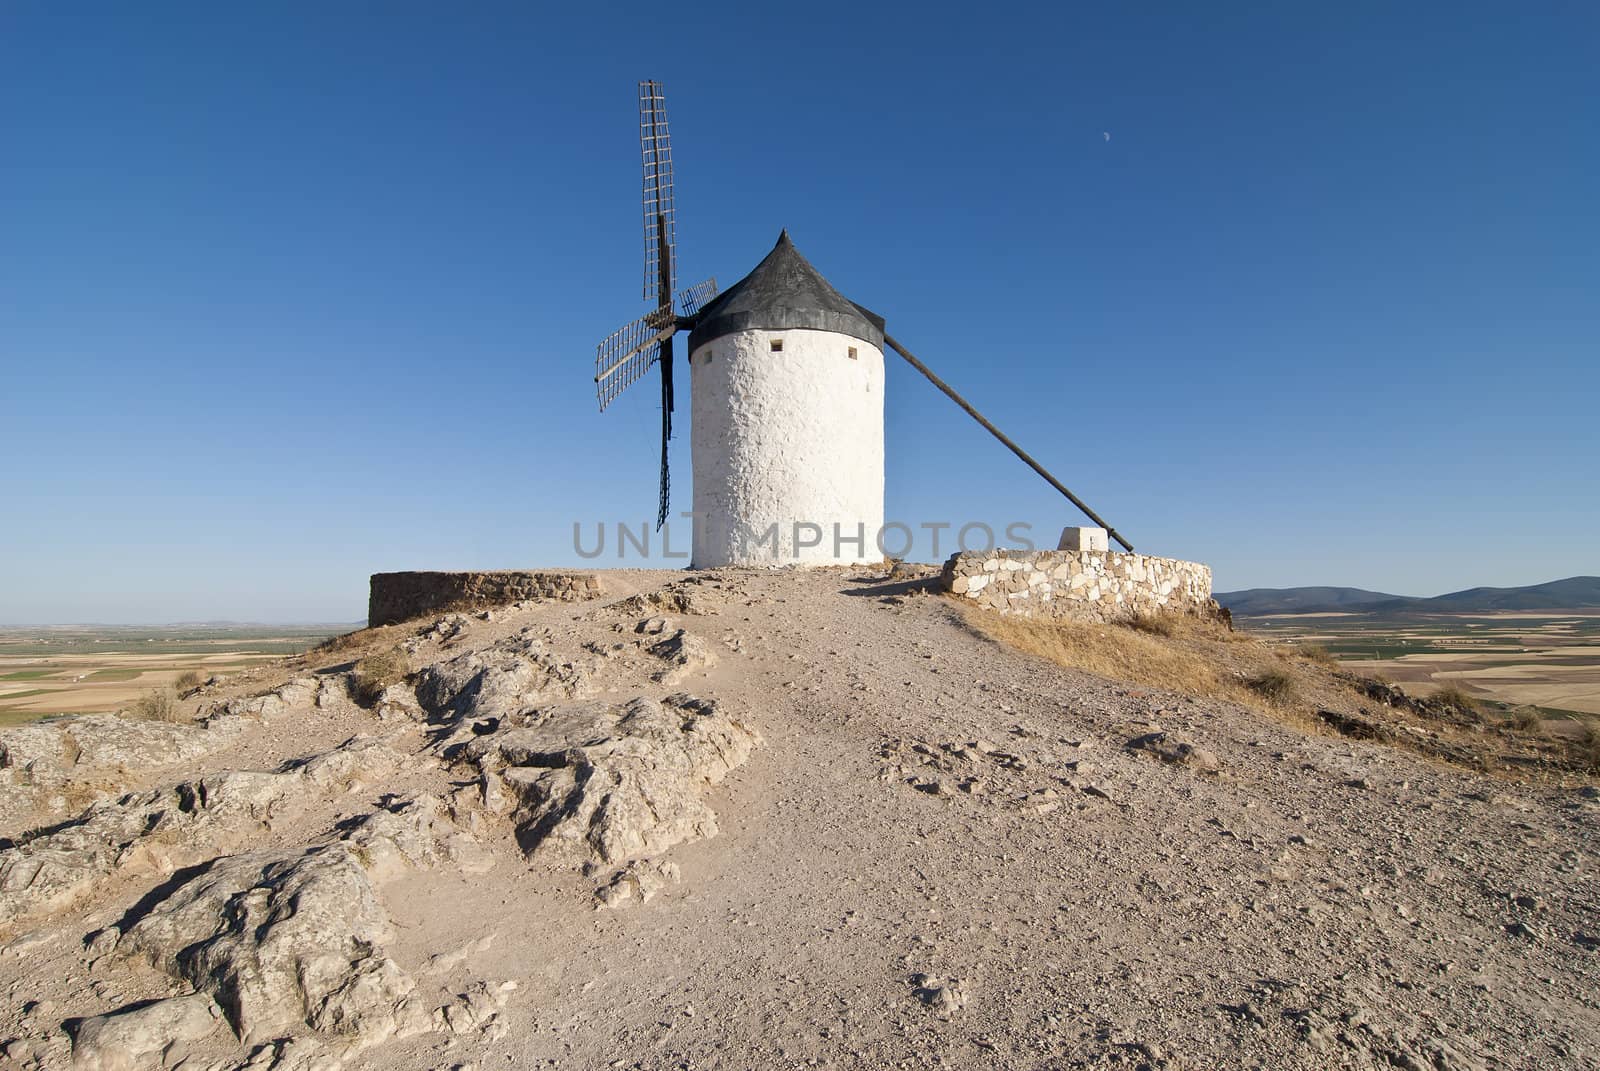 Traditional wind mills in the province of Toledo in Spain, which were reflected by Miguel de Cervantes in his "Don Quixote"